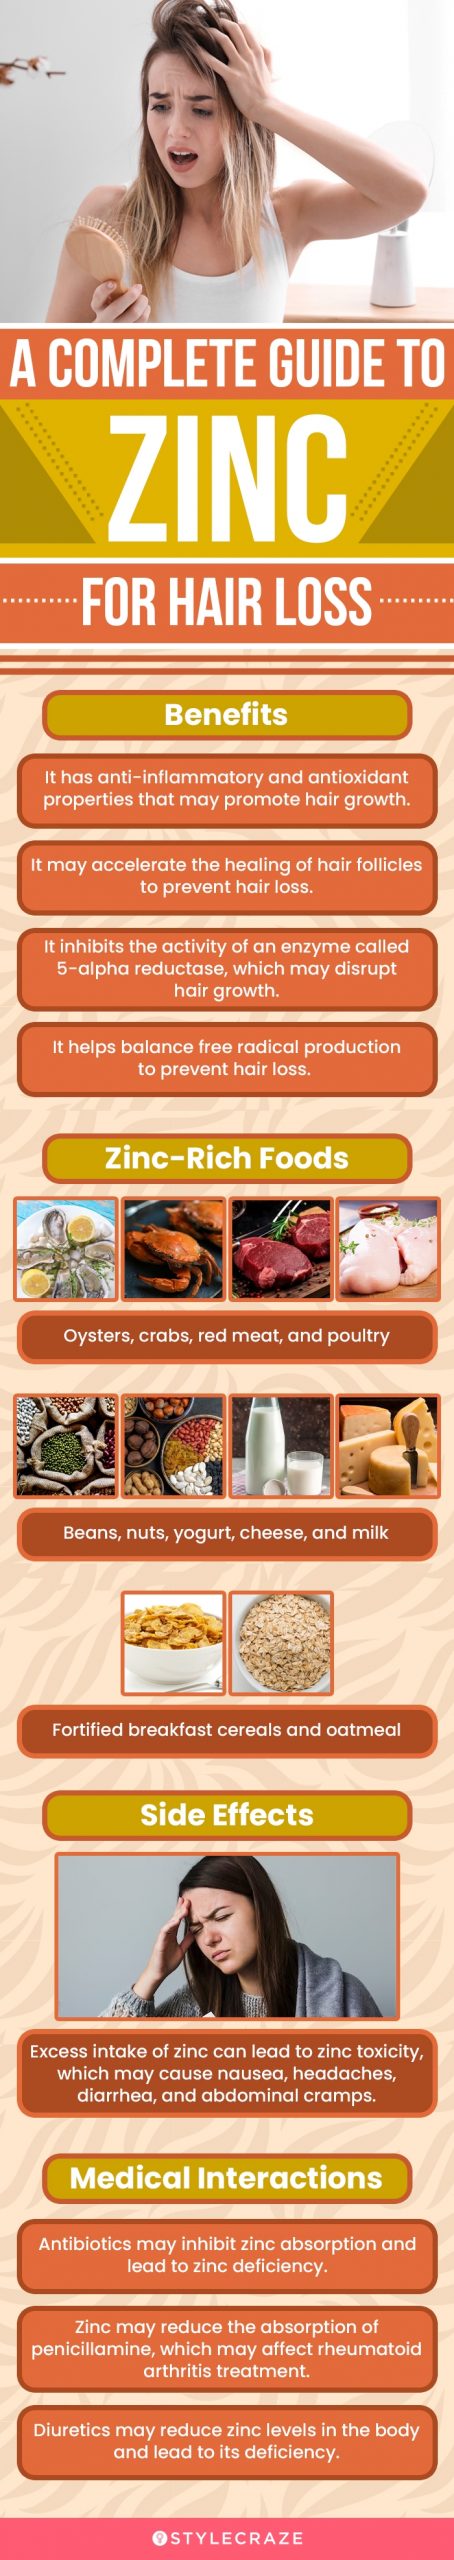 a complete guide to zinc for hair loss (infographic)